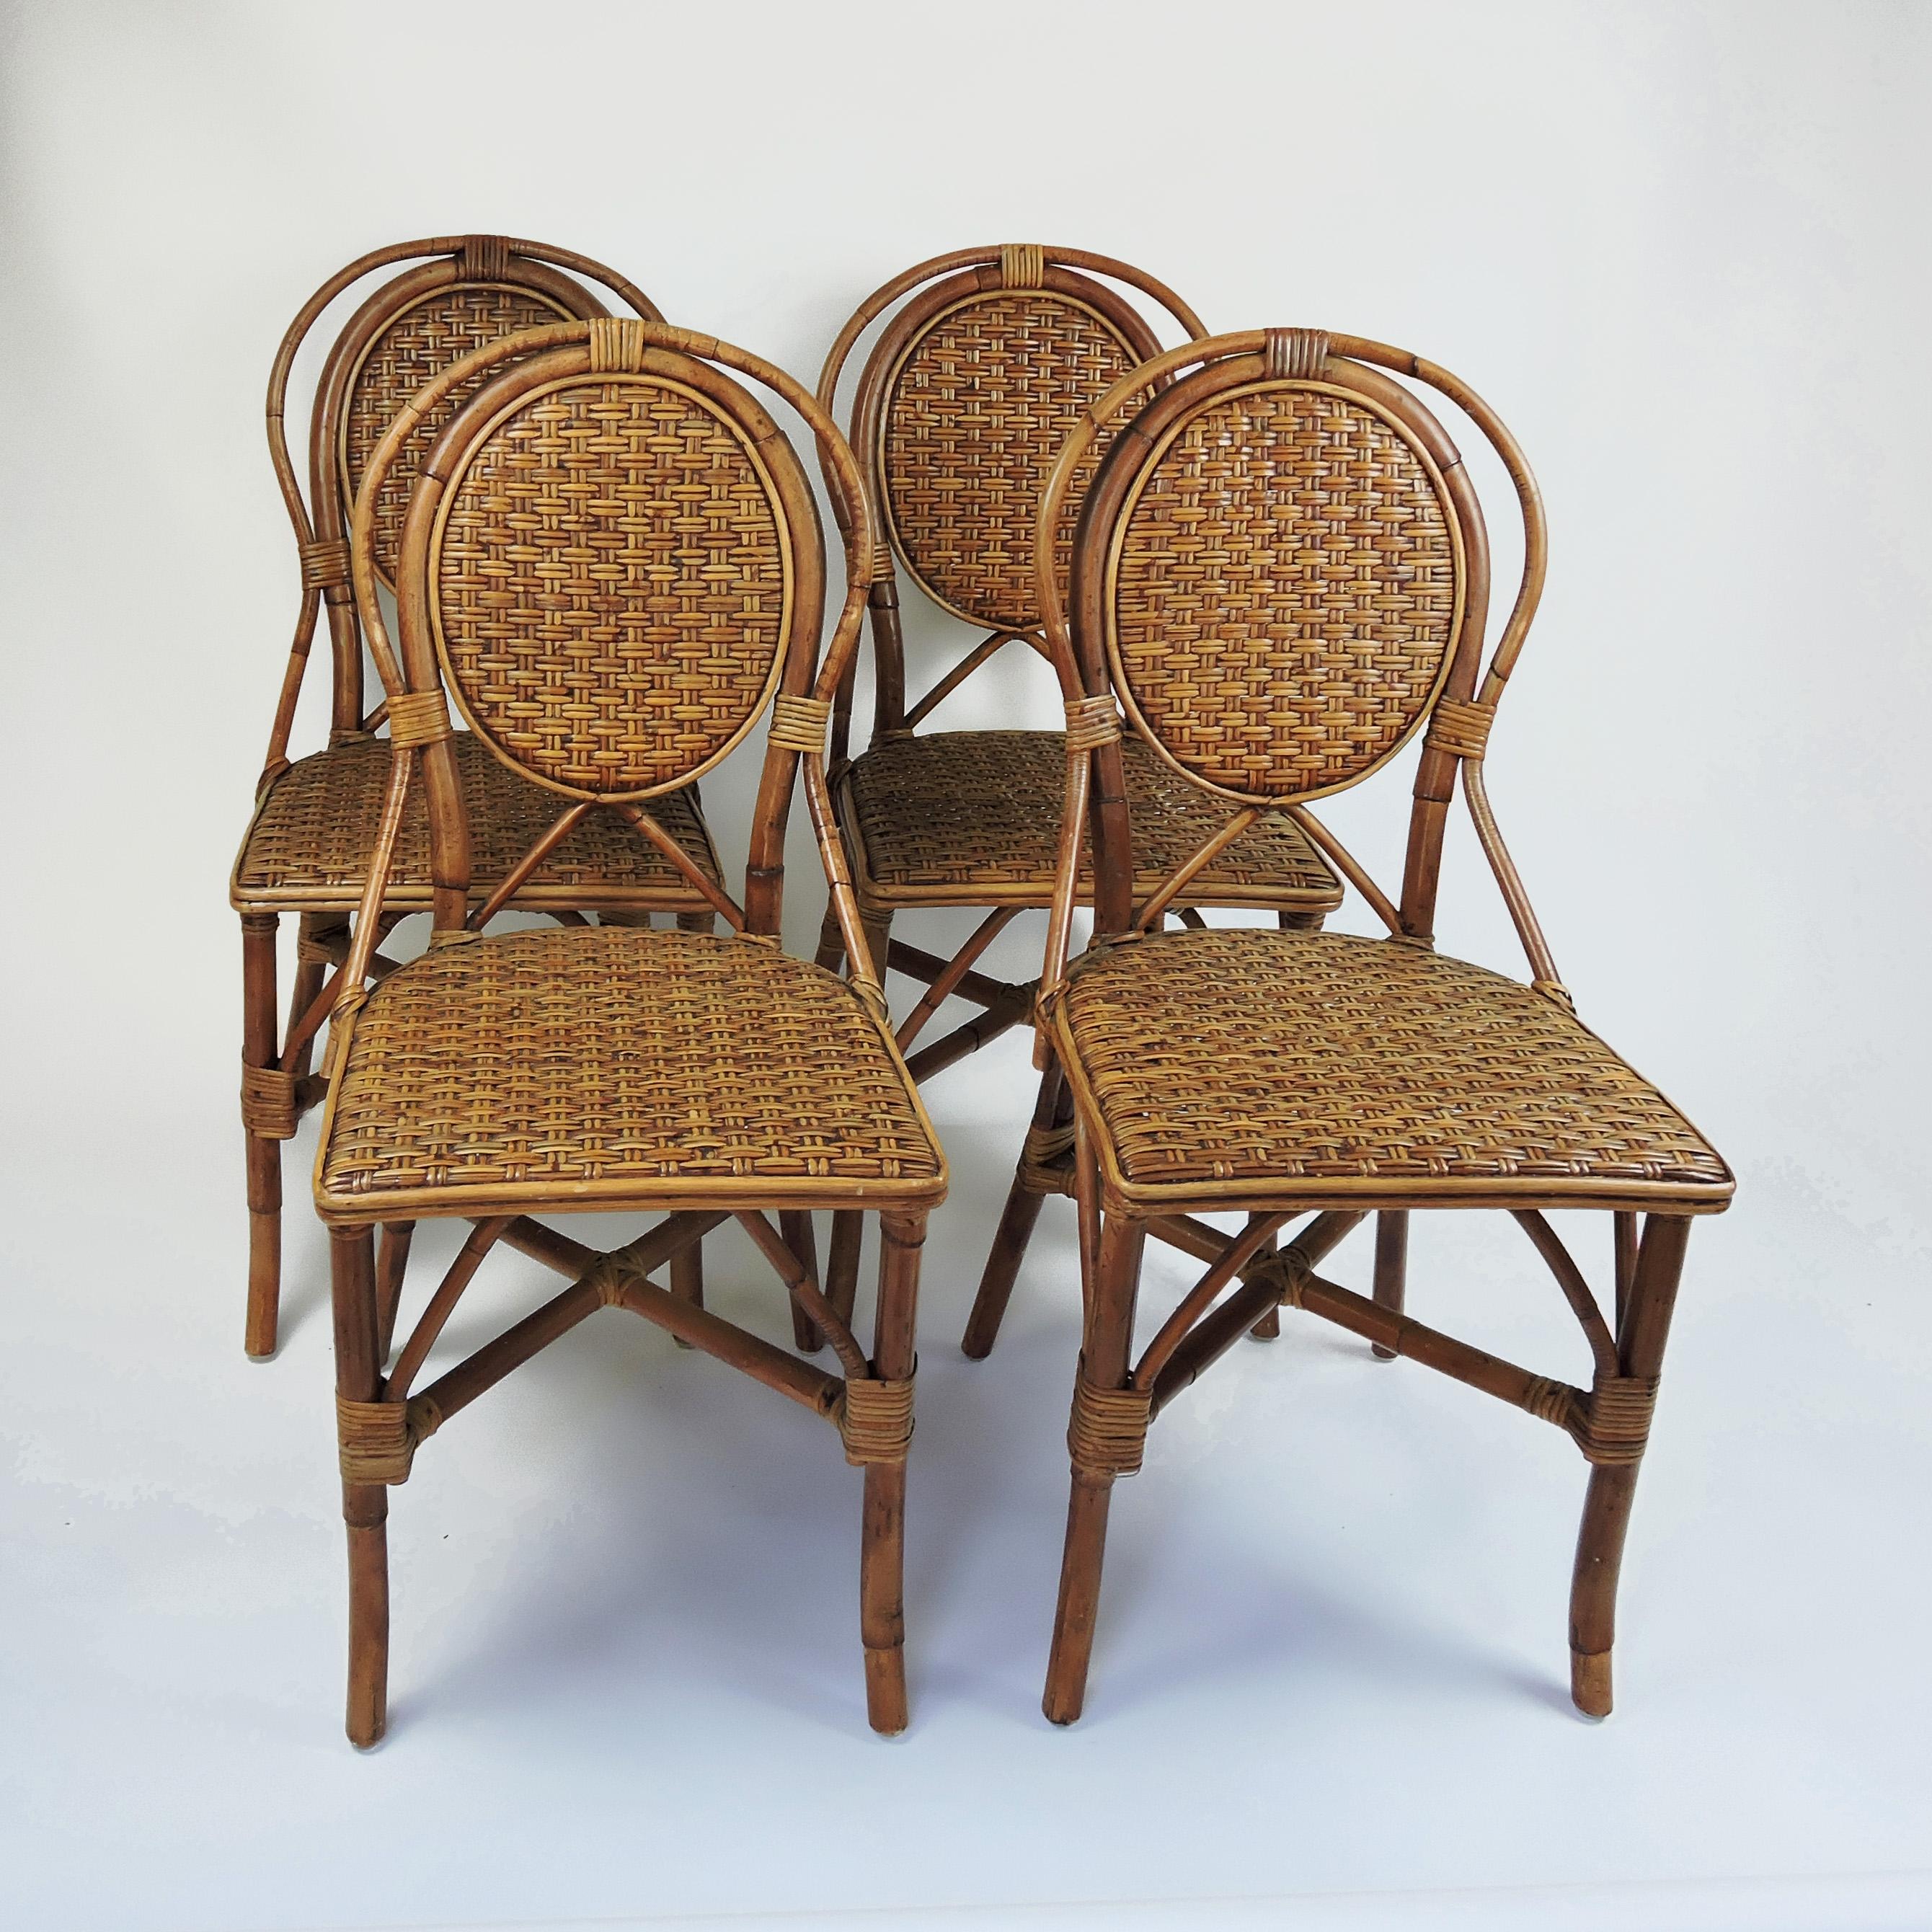 French Style Parisian Cafe Rattan Dining Chairs, Set of 4 In Good Condition For Sale In Chesham, GB